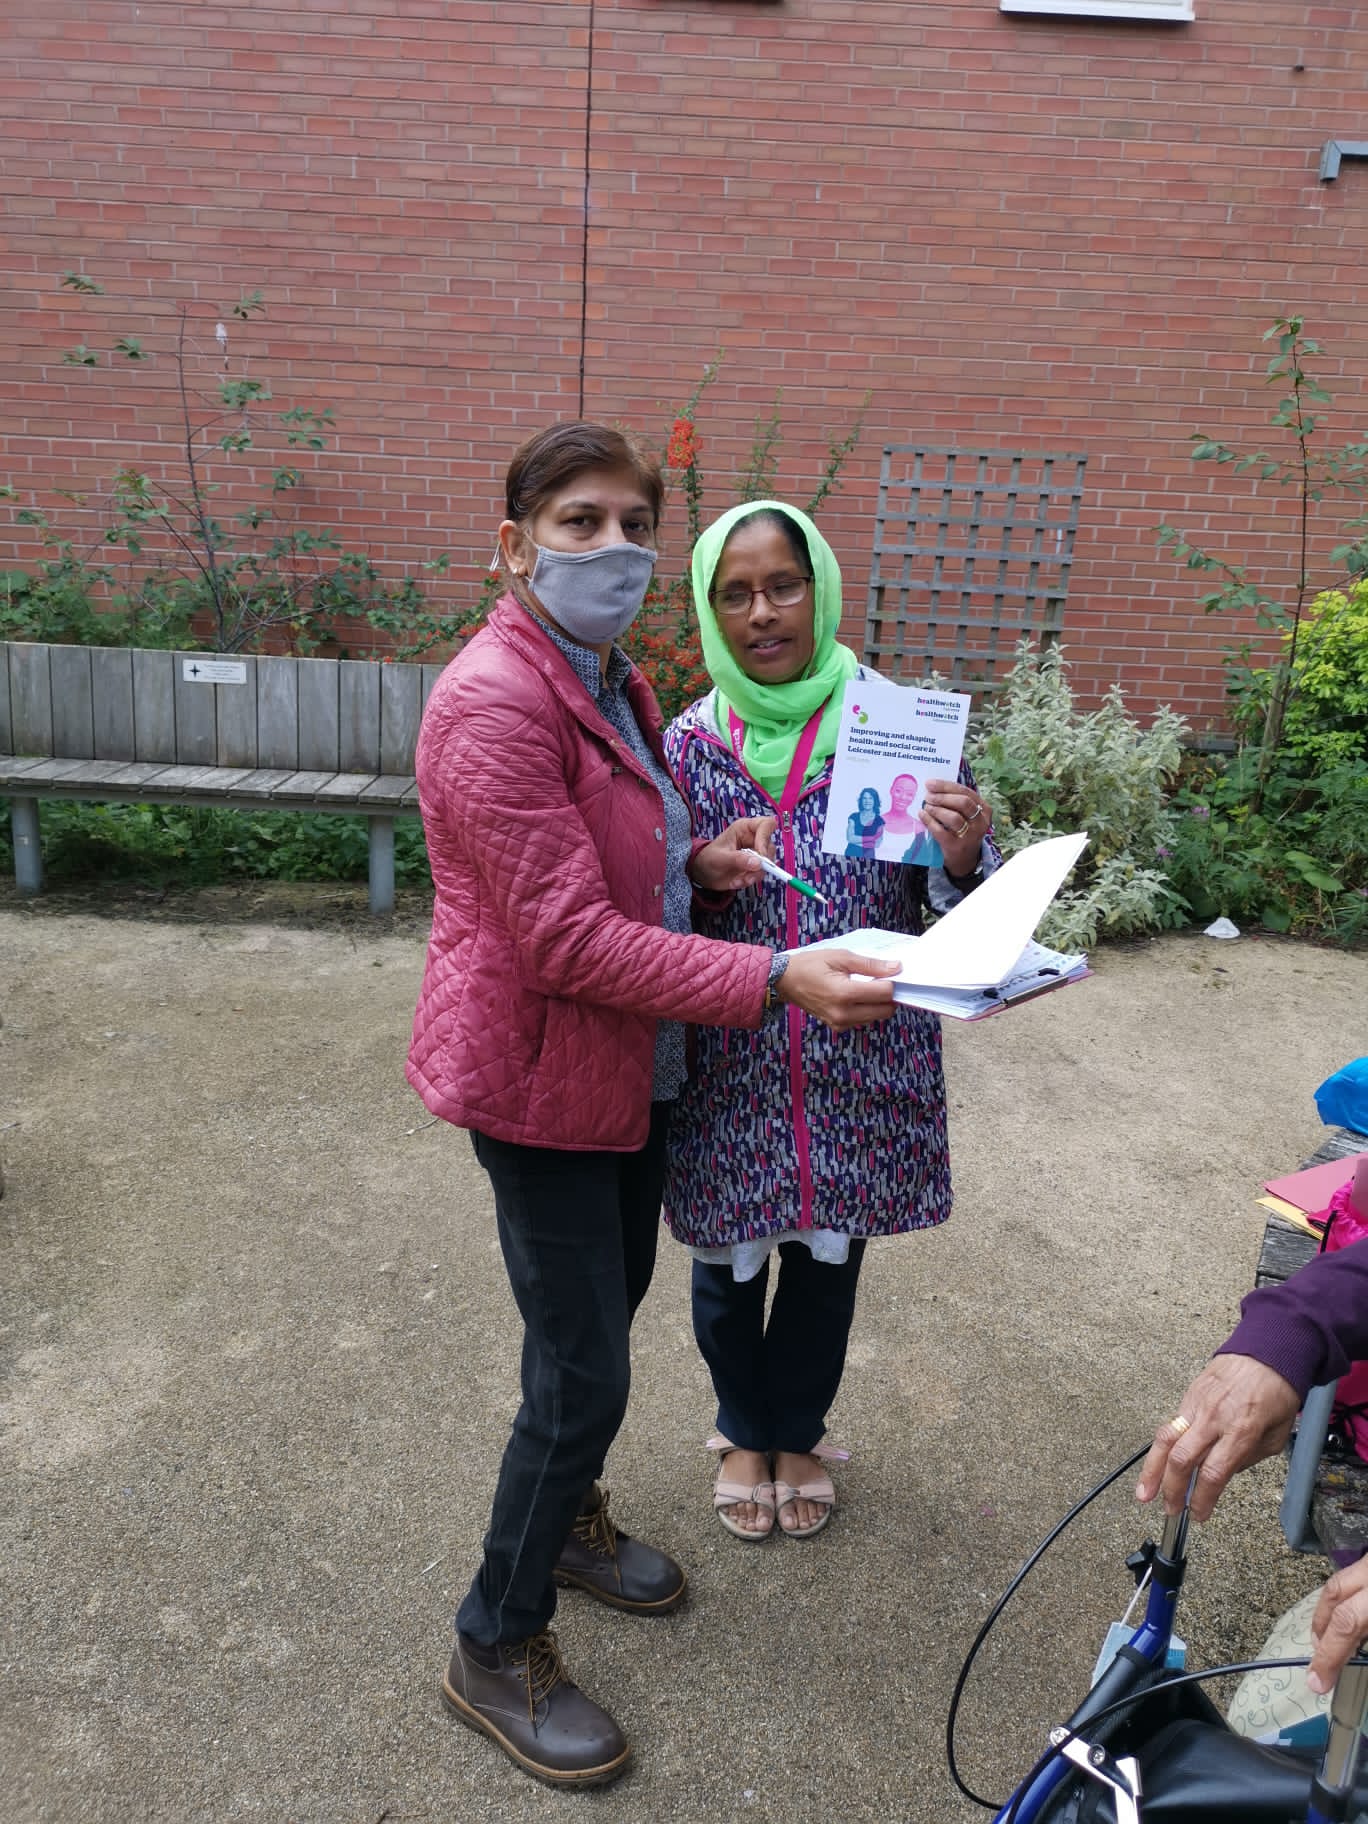 Health watch  Shirin Shahid from health watch visiting the park to ask us some questions